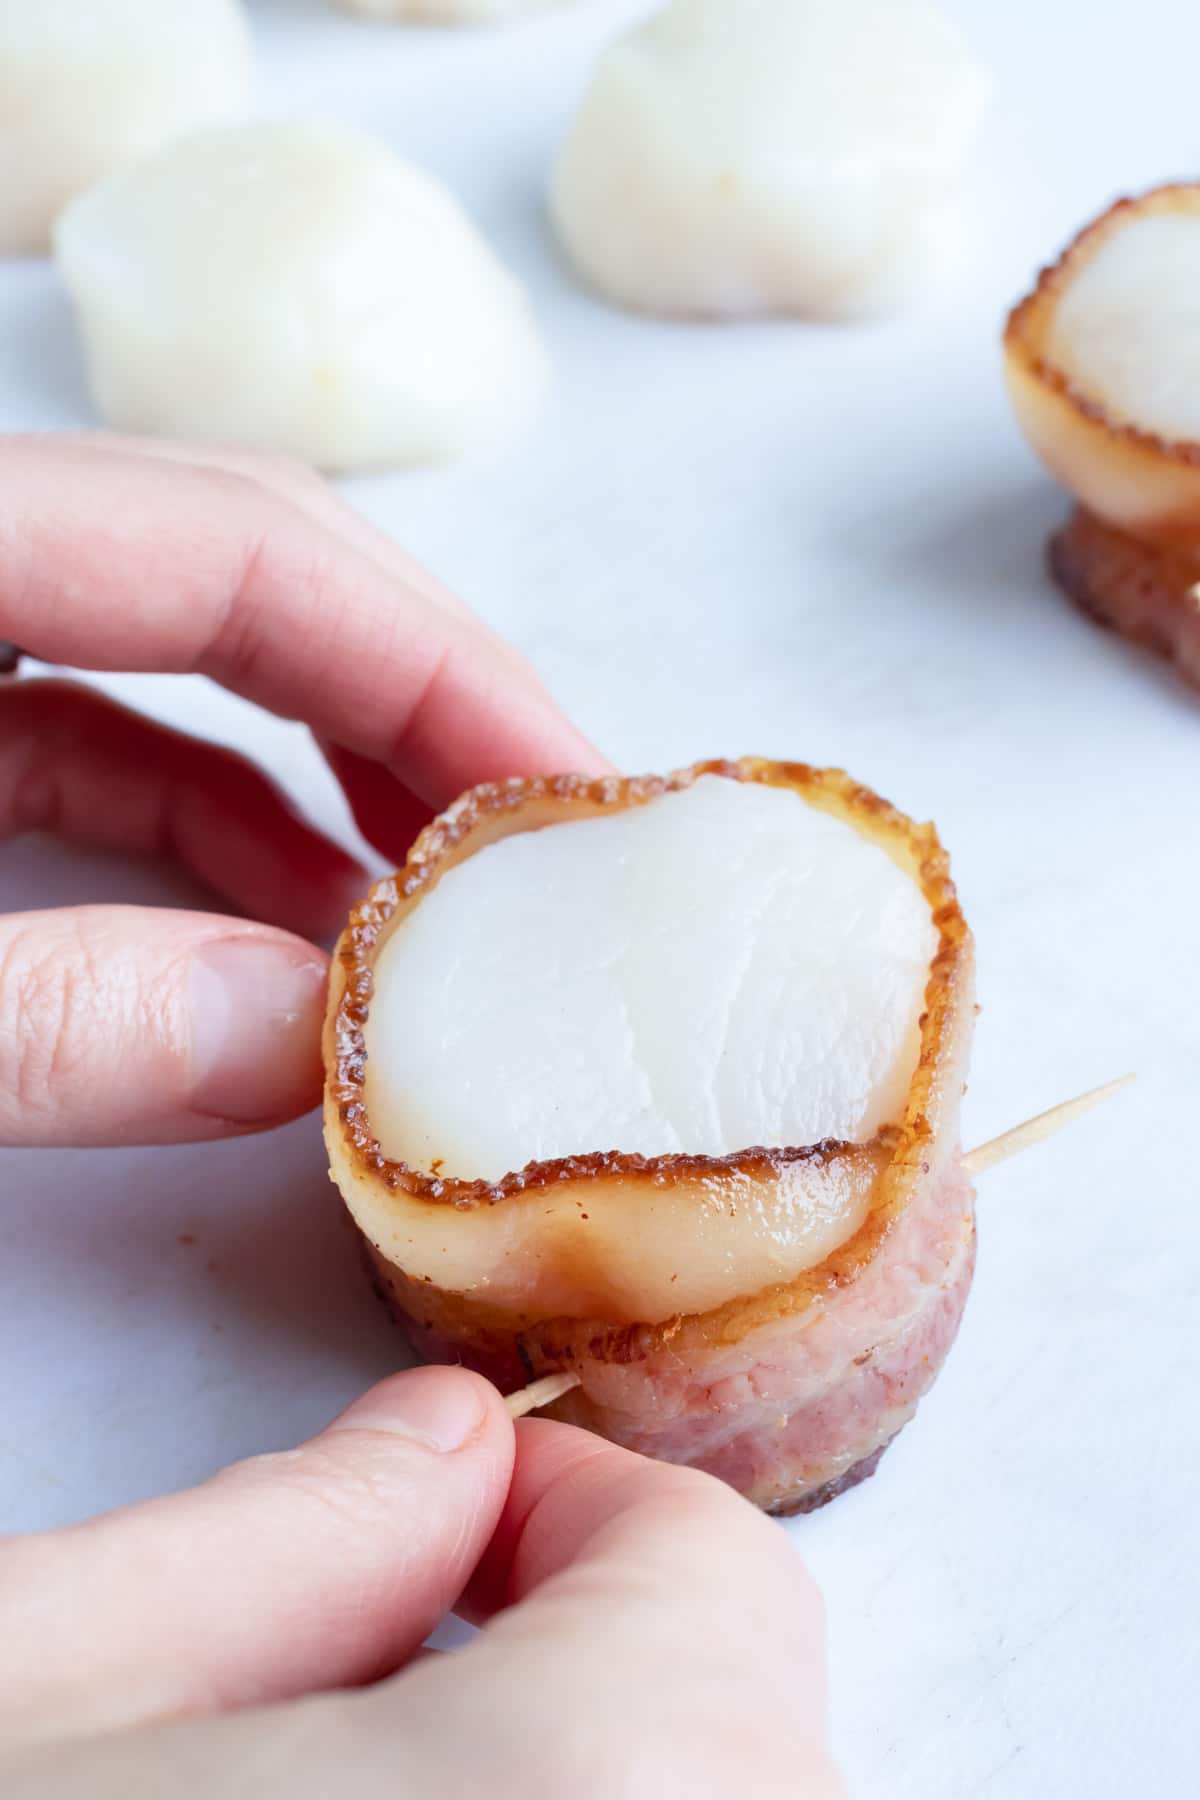 A toothpick being inserted into a bacon wrapped scallop